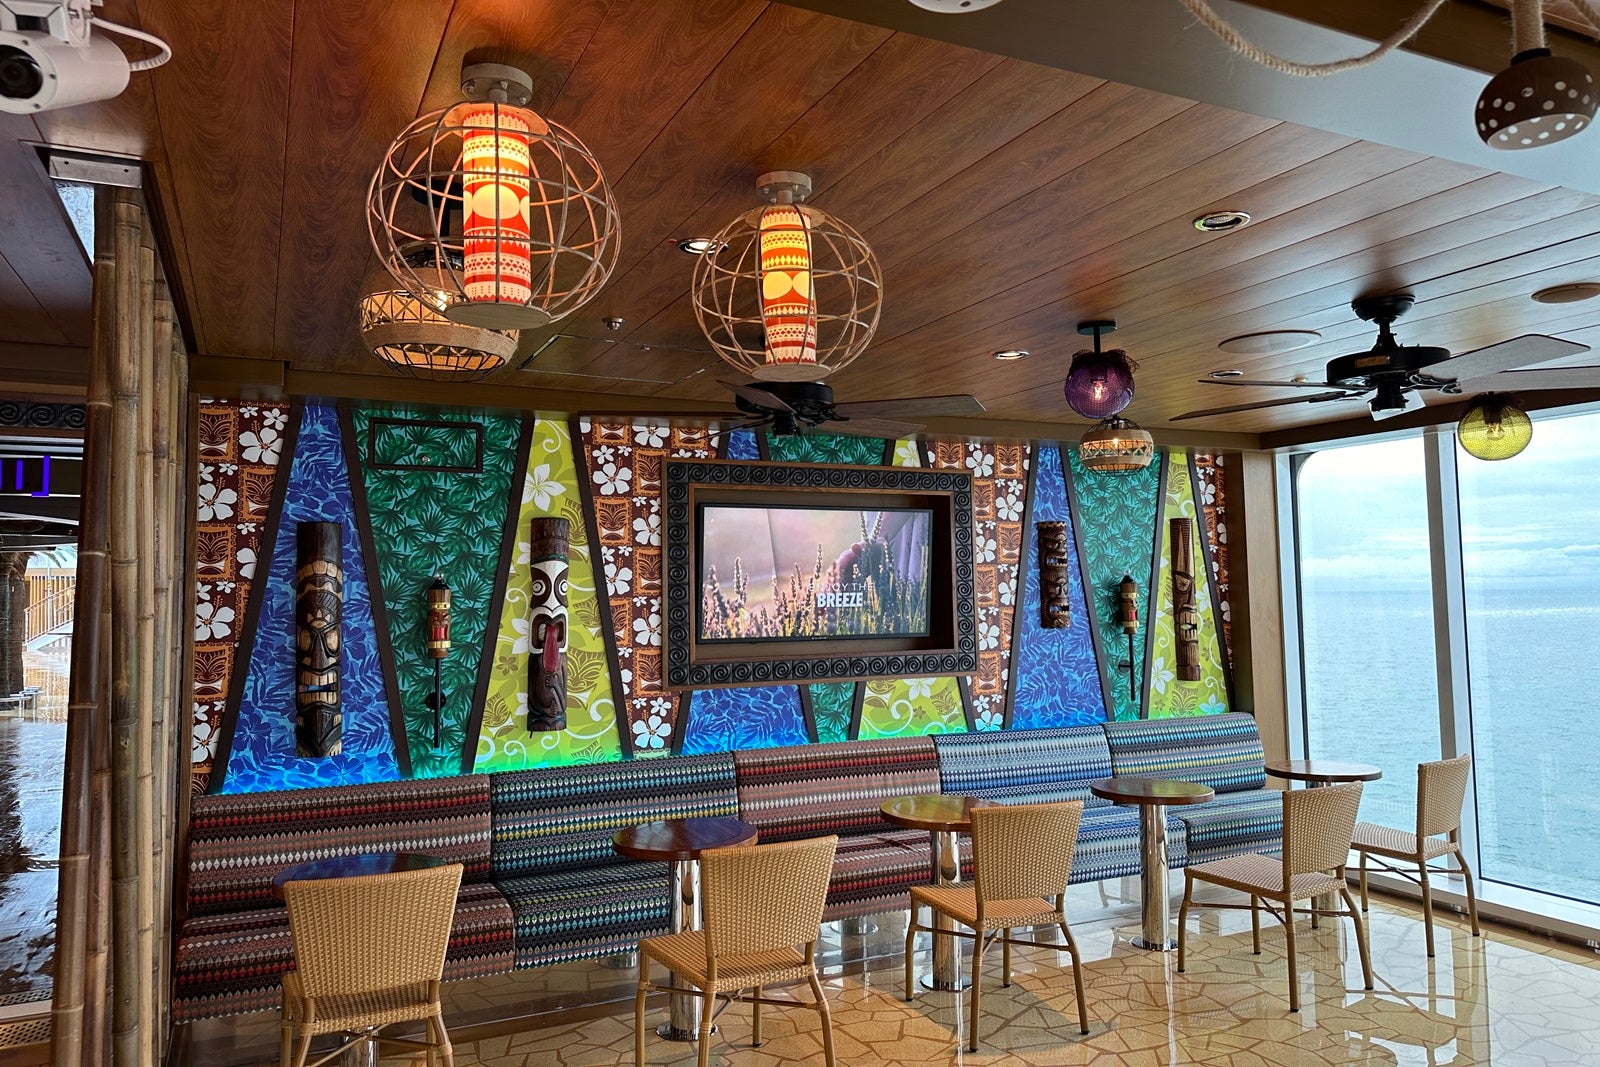 The inside of a tiki bar with rustic seating, tribal light fixtures and colorful wall art